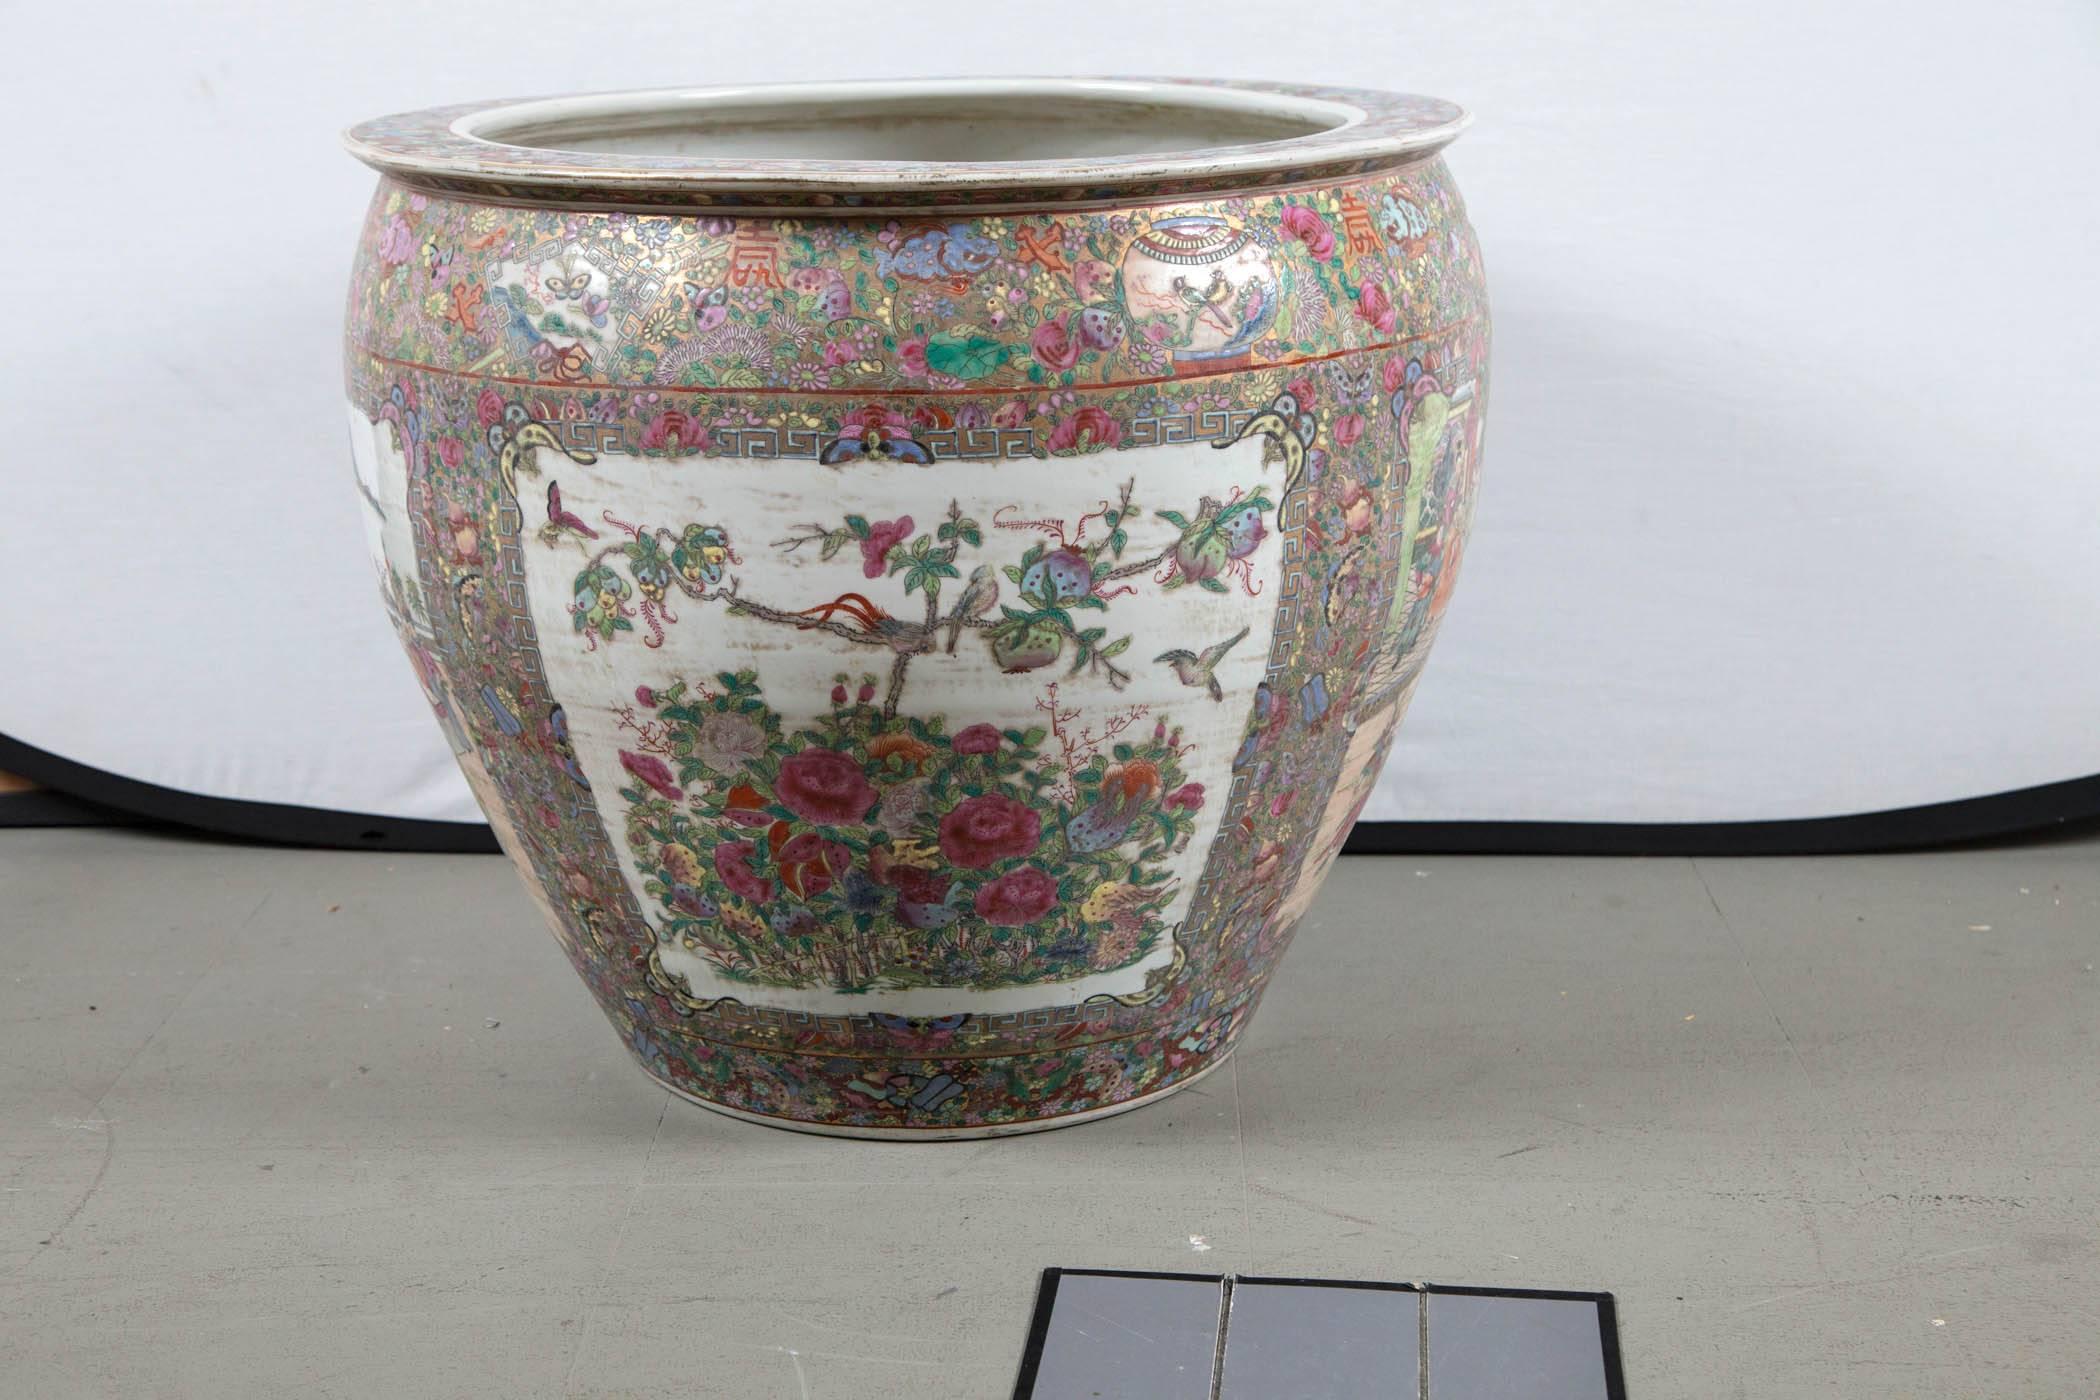 A rare palace-size Chinese hand-painted porcelain centre bowl with detailed enamel and gold painted scenes. Imperial porcelain quality with realistic lifelike features on each person depicted.